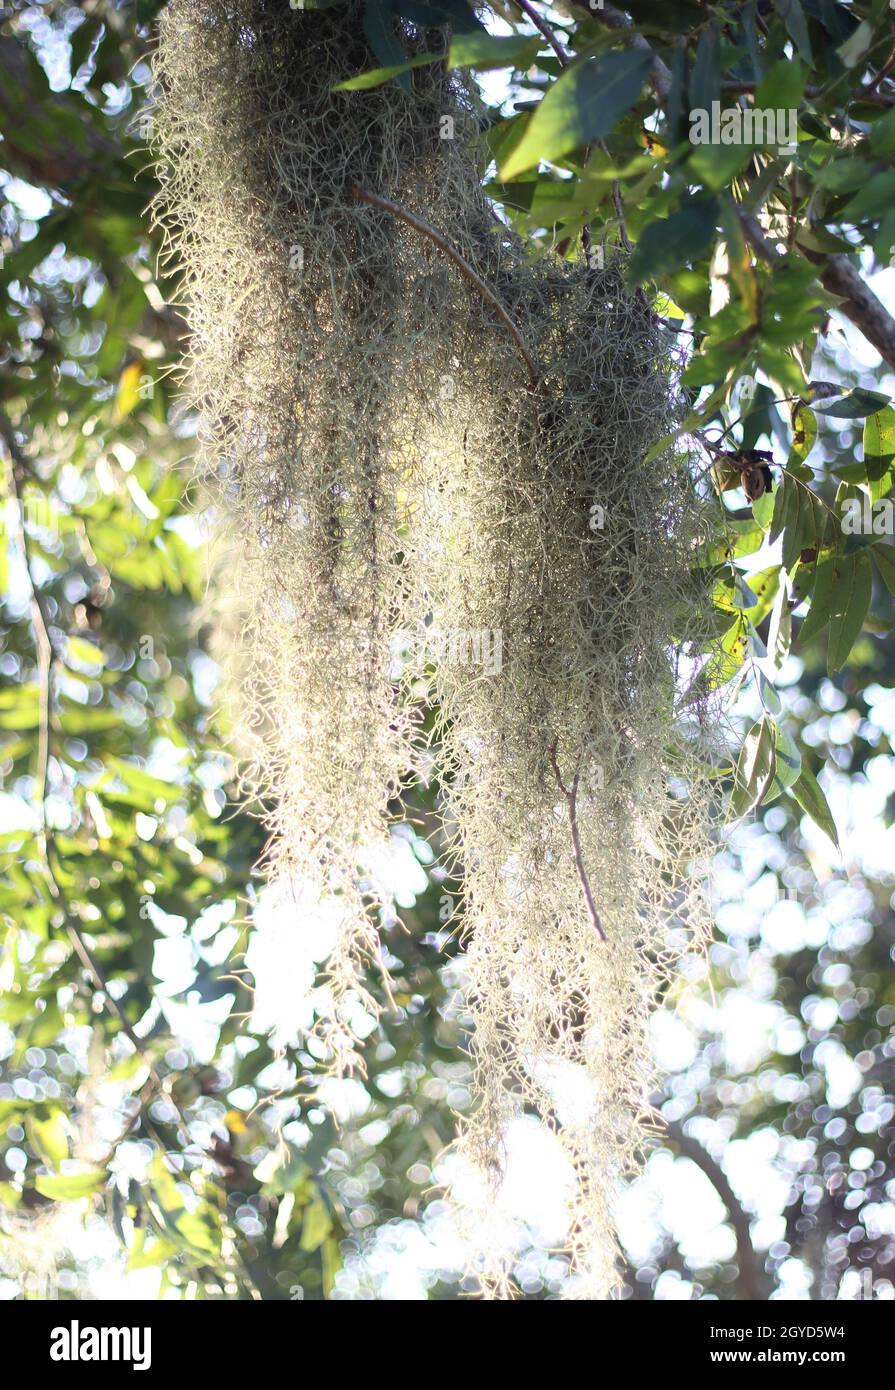 Spanish moss Tillandsia usneoides hanging from tree branch Stock Photo